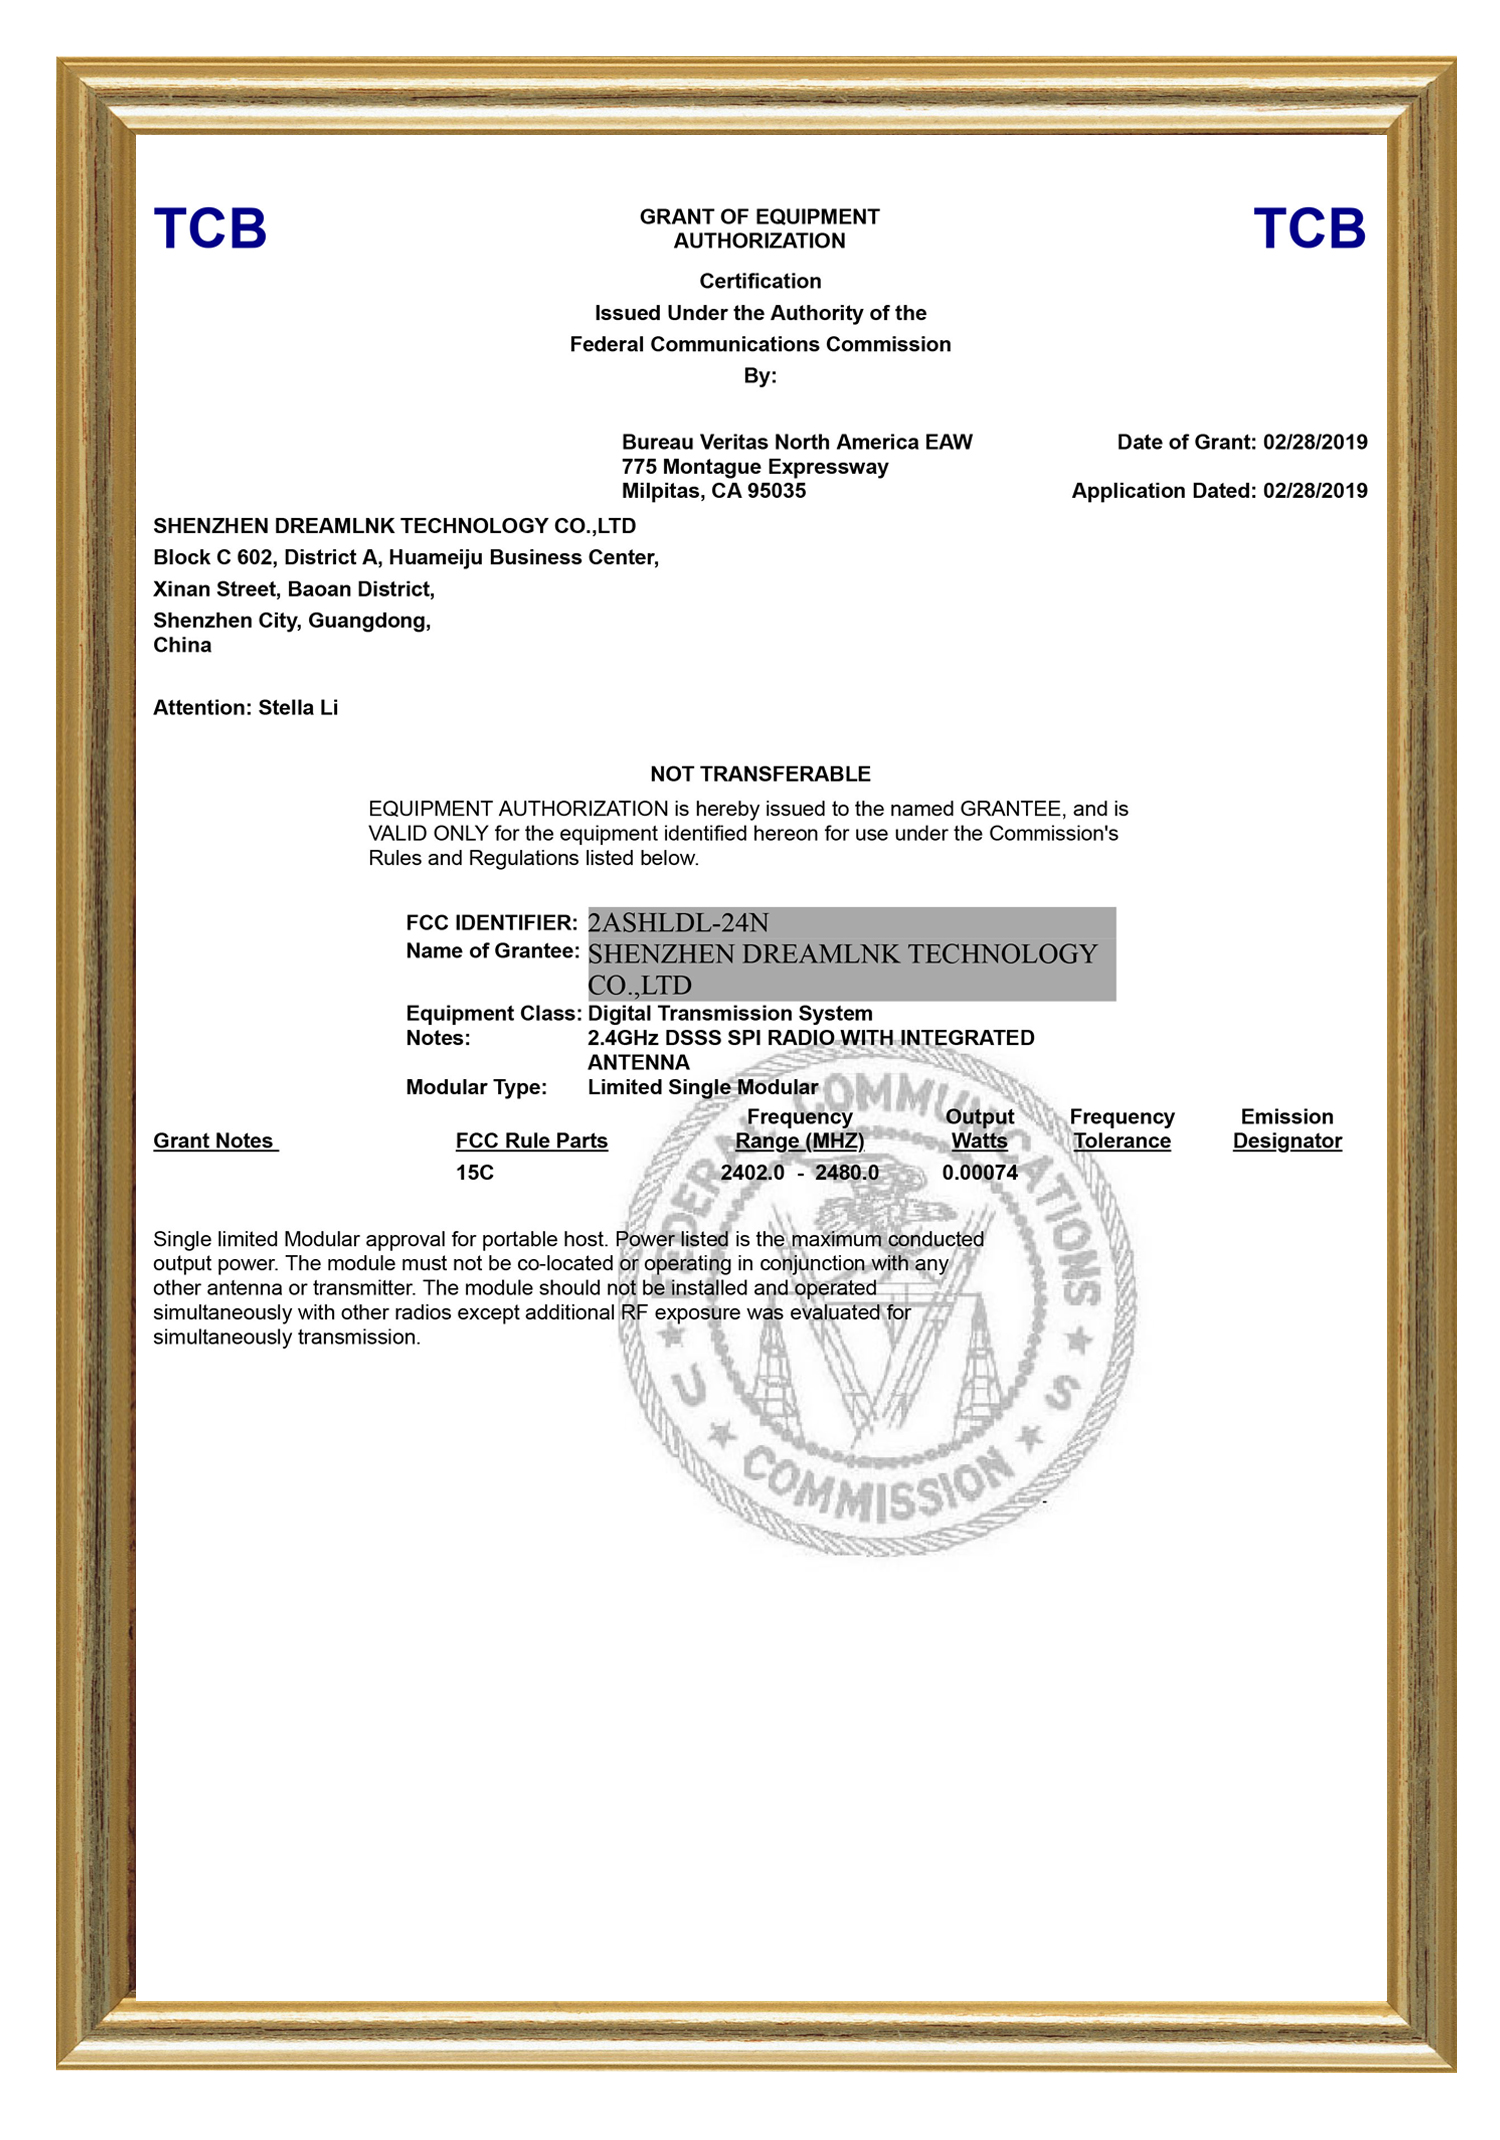 FCC Certificates of DL-24N from DreamLNK